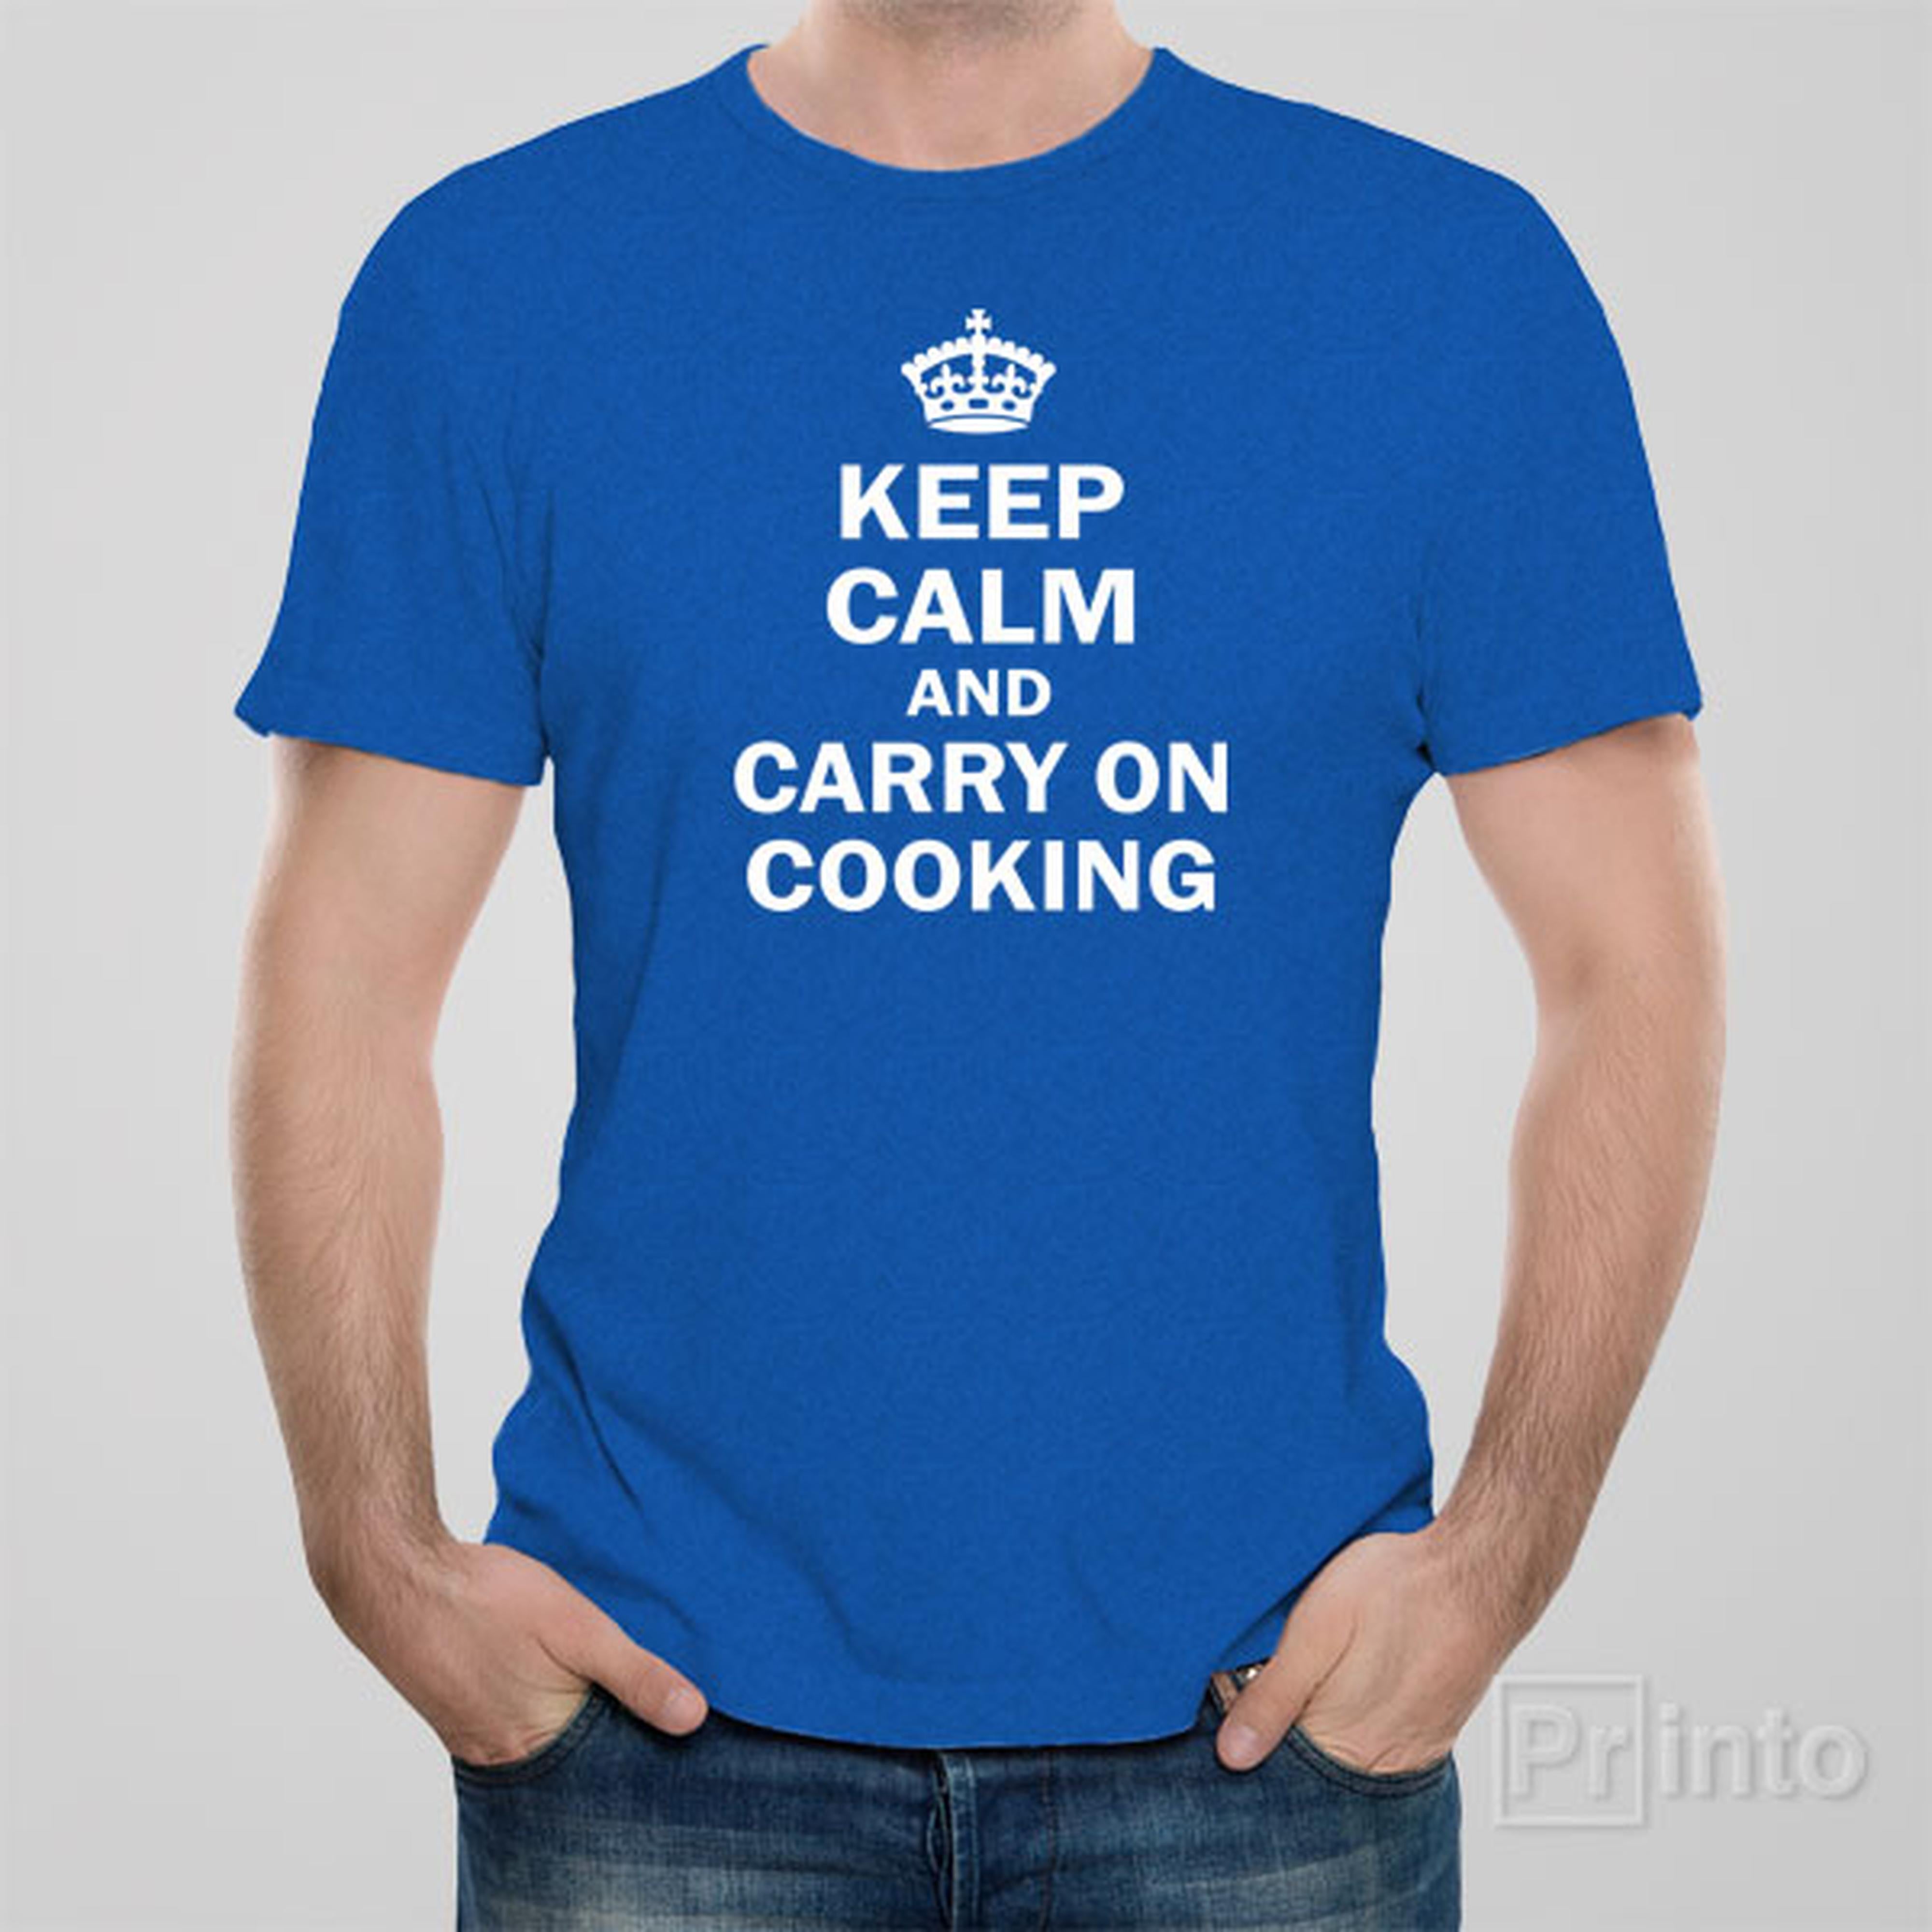 keep-calm-and-carry-on-cooking-t-shirt